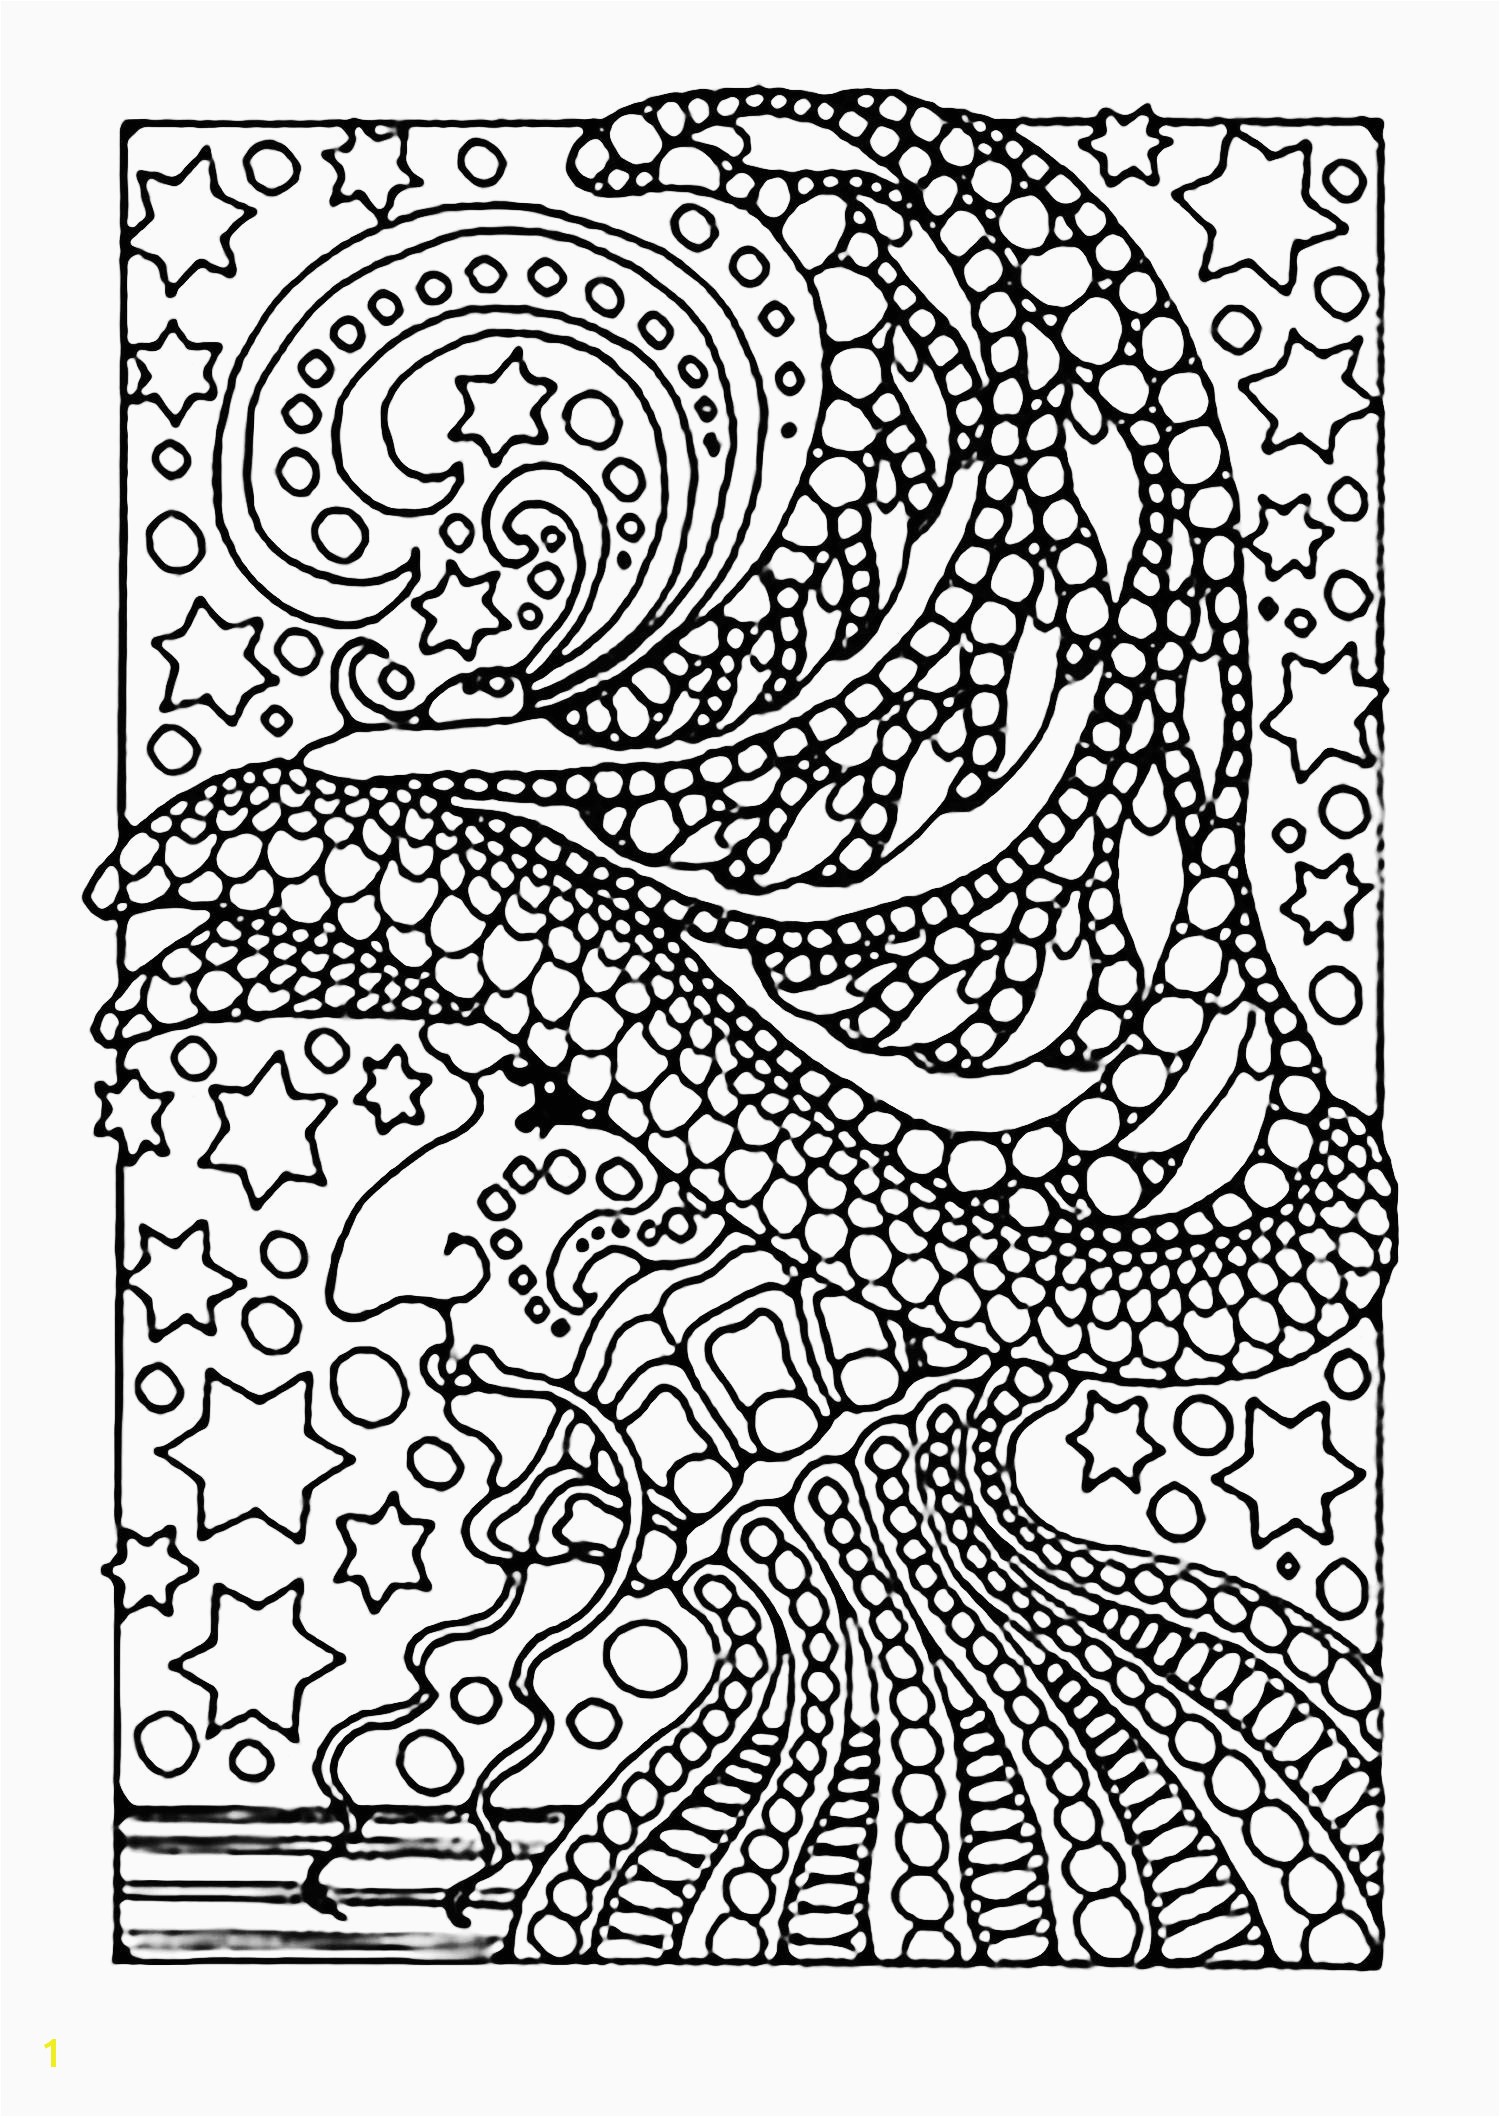 Www Coloring Pages Beautiful Free Internet Coloring Pages